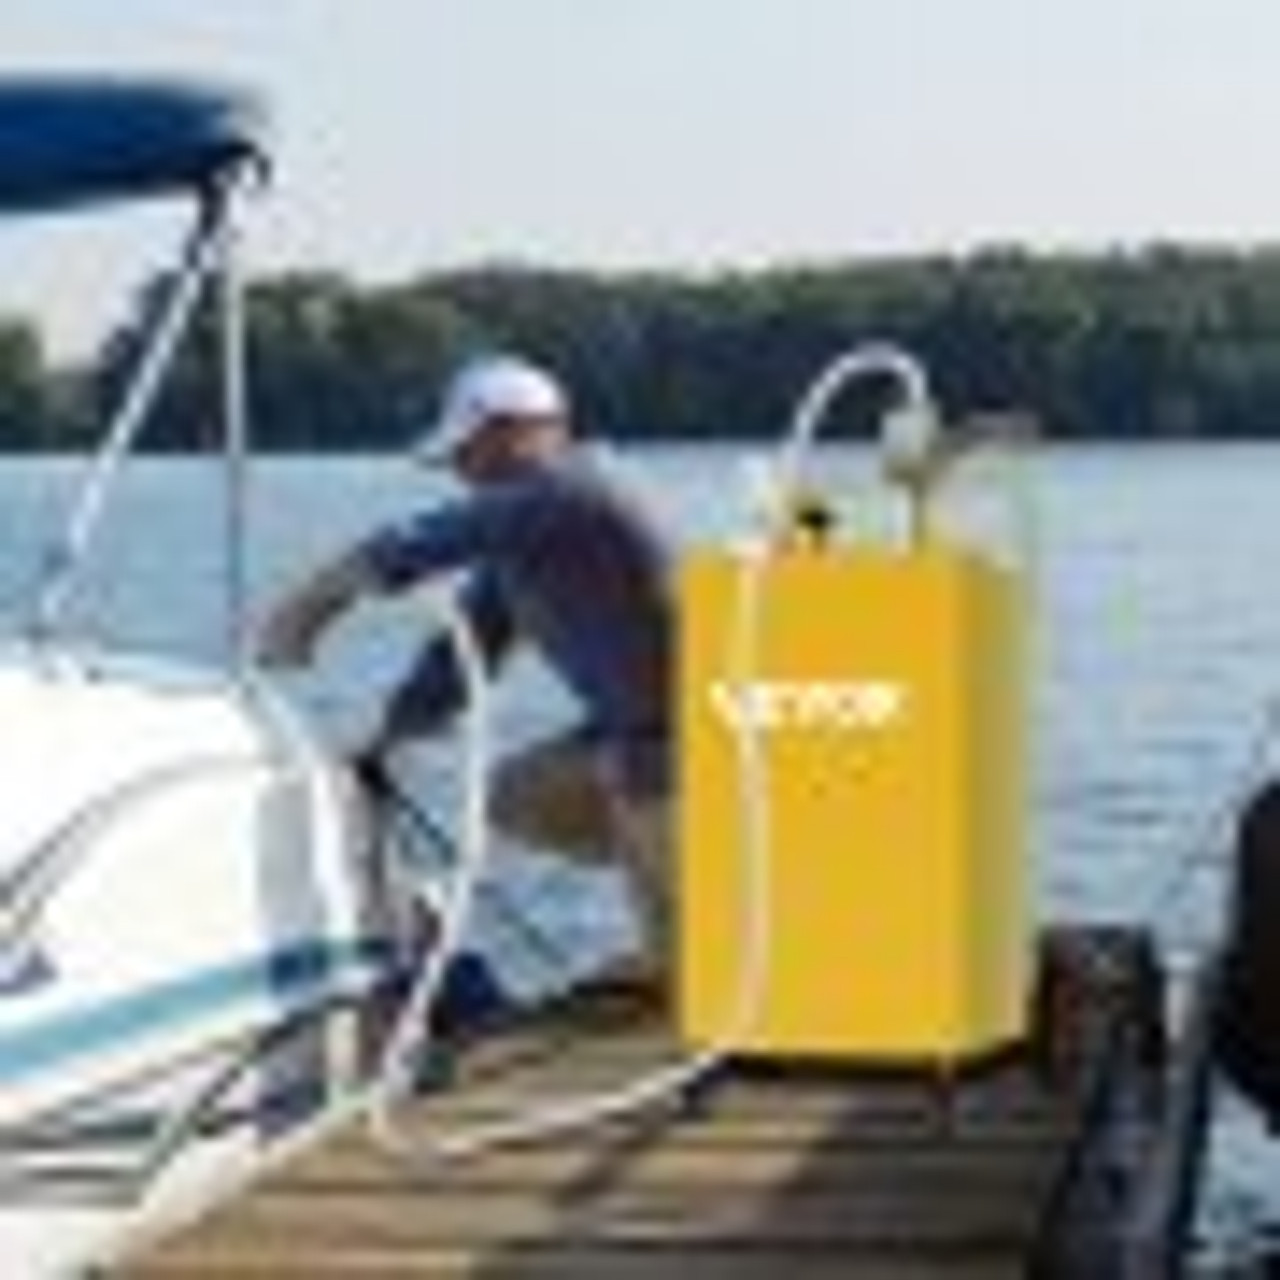 Fuel Caddy, 35 Gallon, Gas Storage Tank on 4 Wheels, with Manuel Transfer Pump, Gasoline Diesel Fuel Container for Cars, Lawn Mowers, ATVs, Boats, More, Yellow